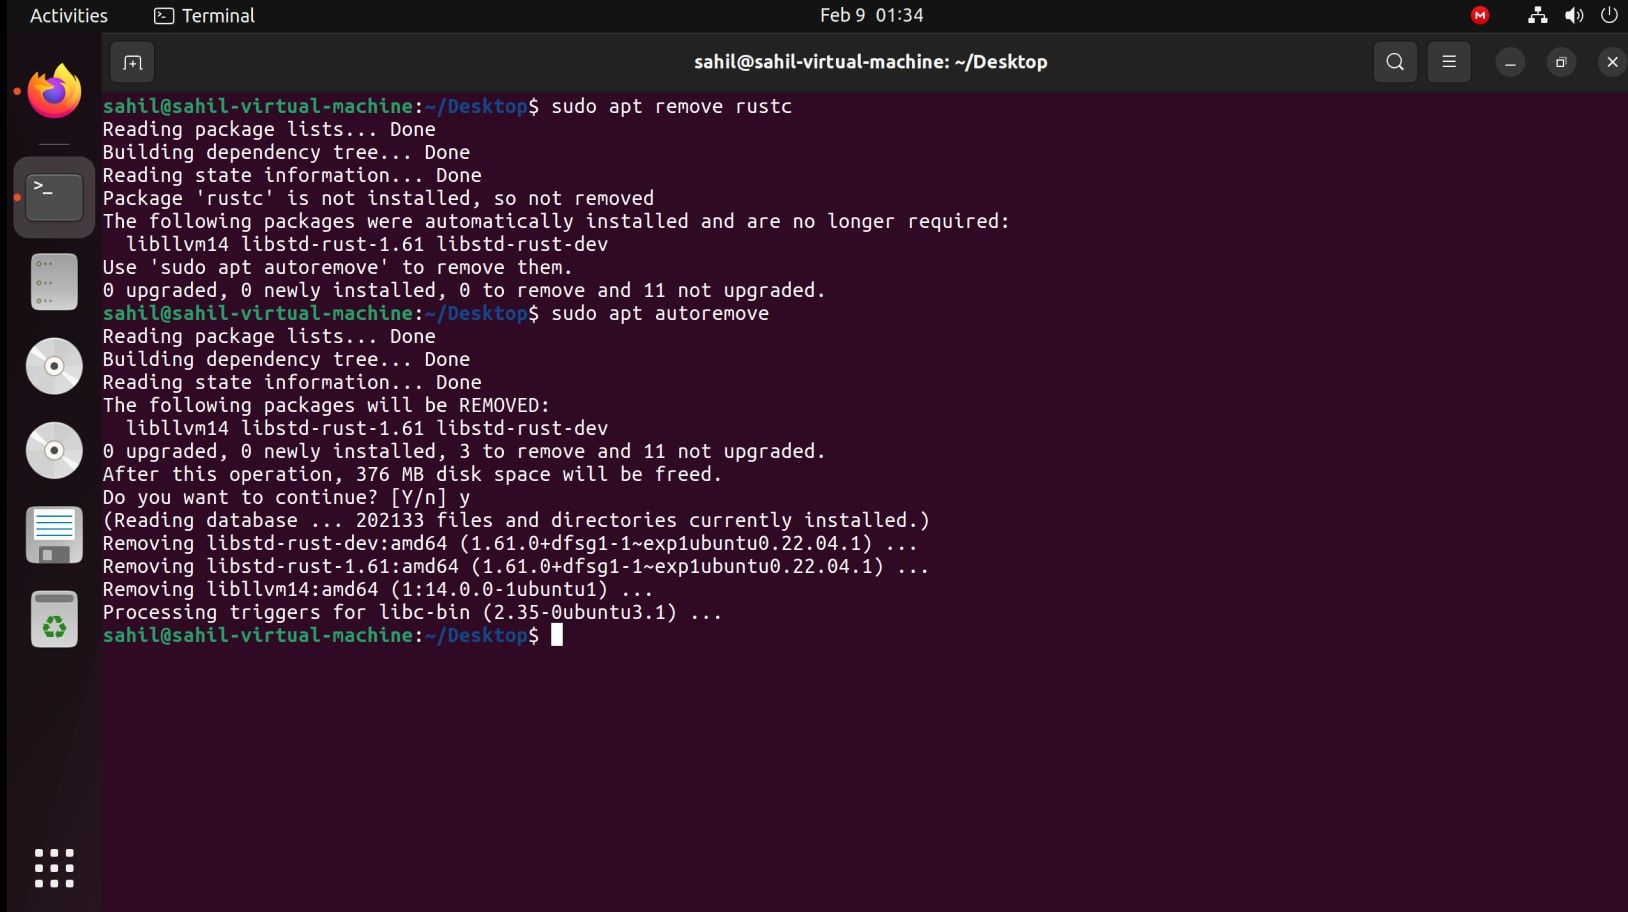 Apt command to remove rust package in Ubuntu